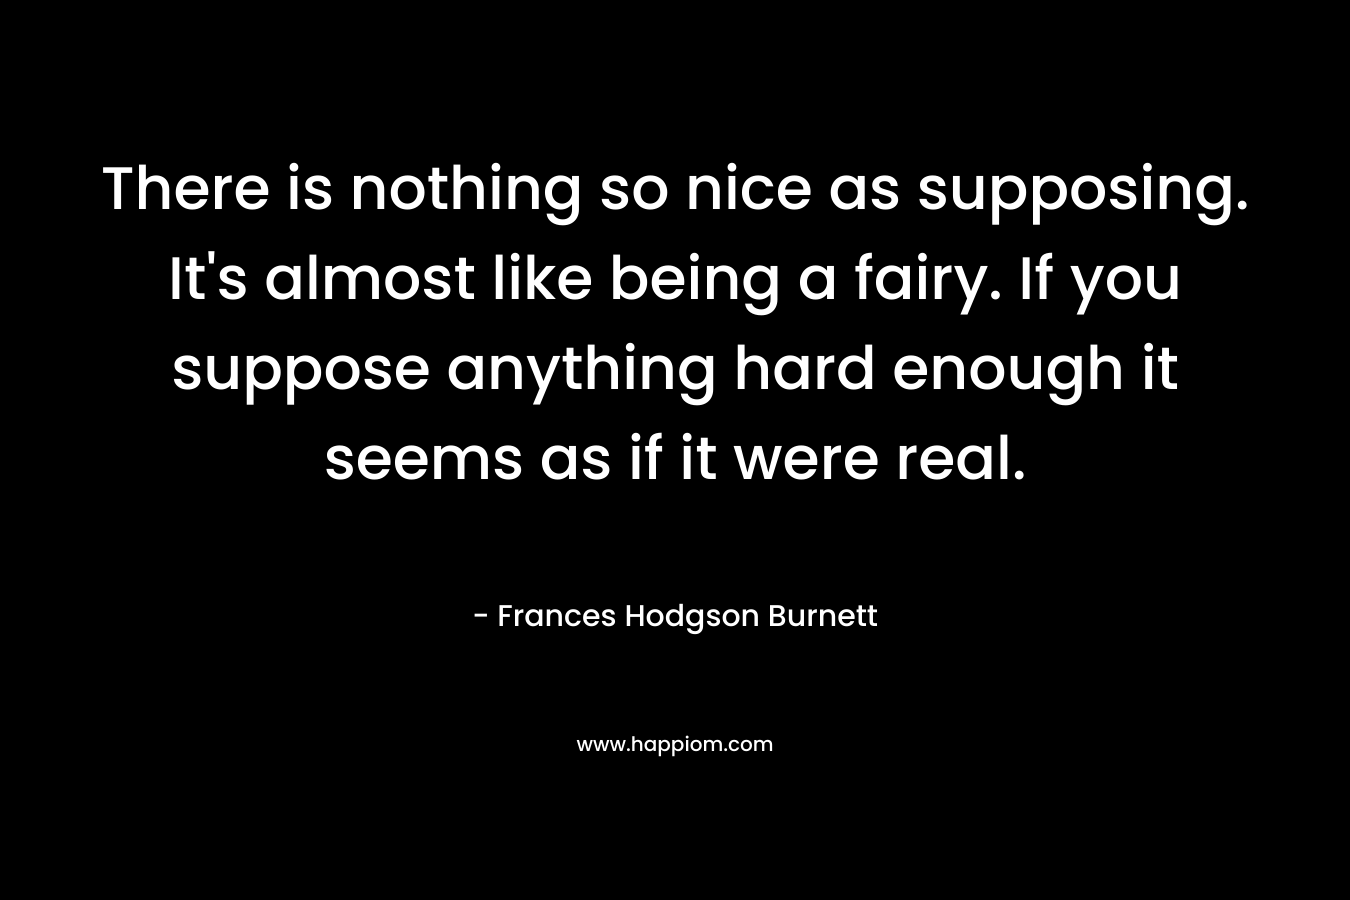 There is nothing so nice as supposing. It's almost like being a fairy. If you suppose anything hard enough it seems as if it were real.